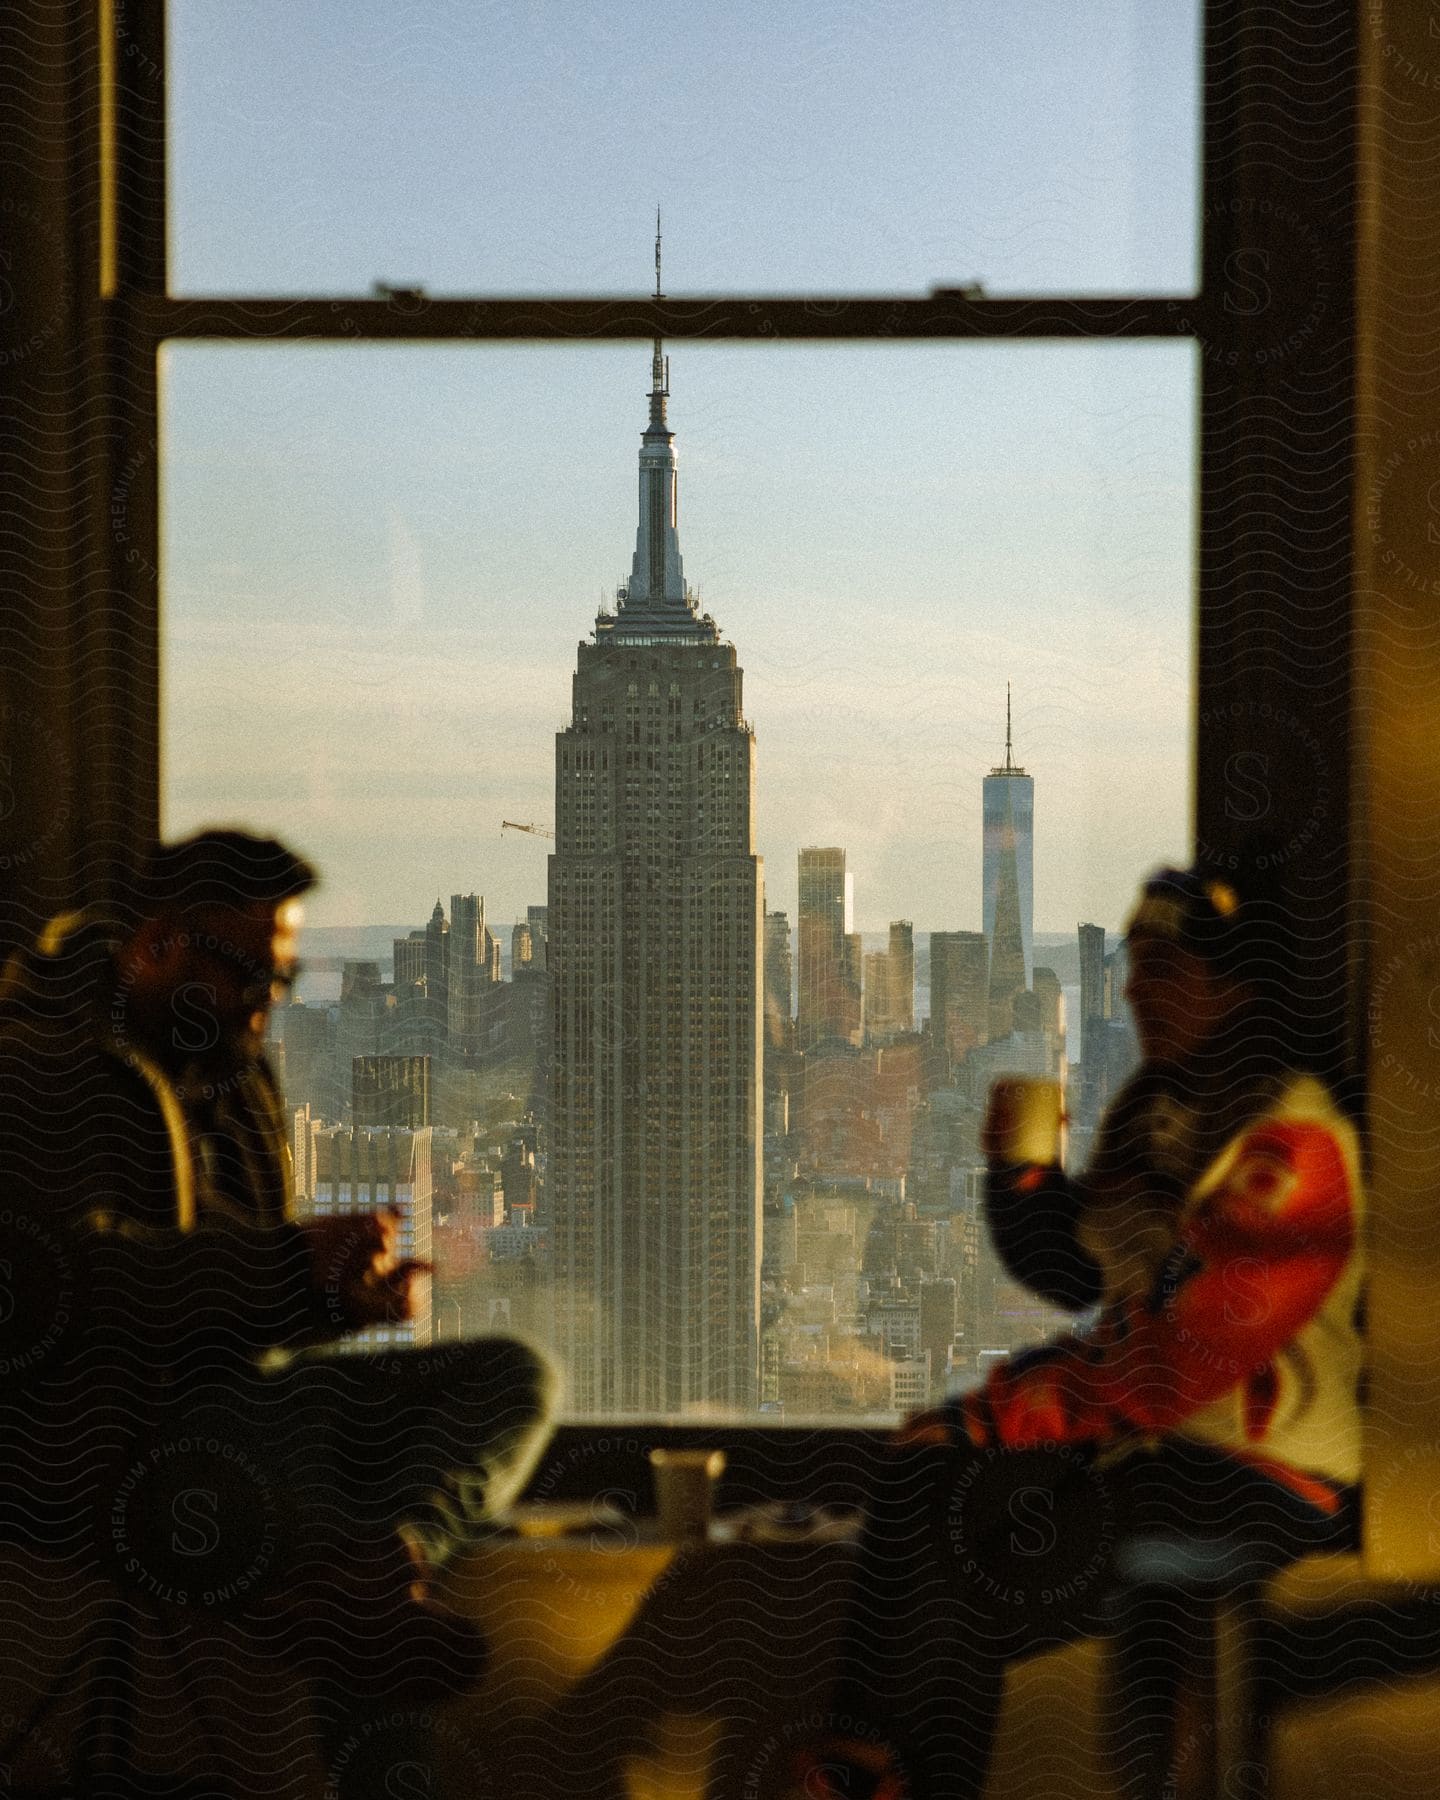 Two people sit next to a large window while drinking coffee and the Empire State building is visible.